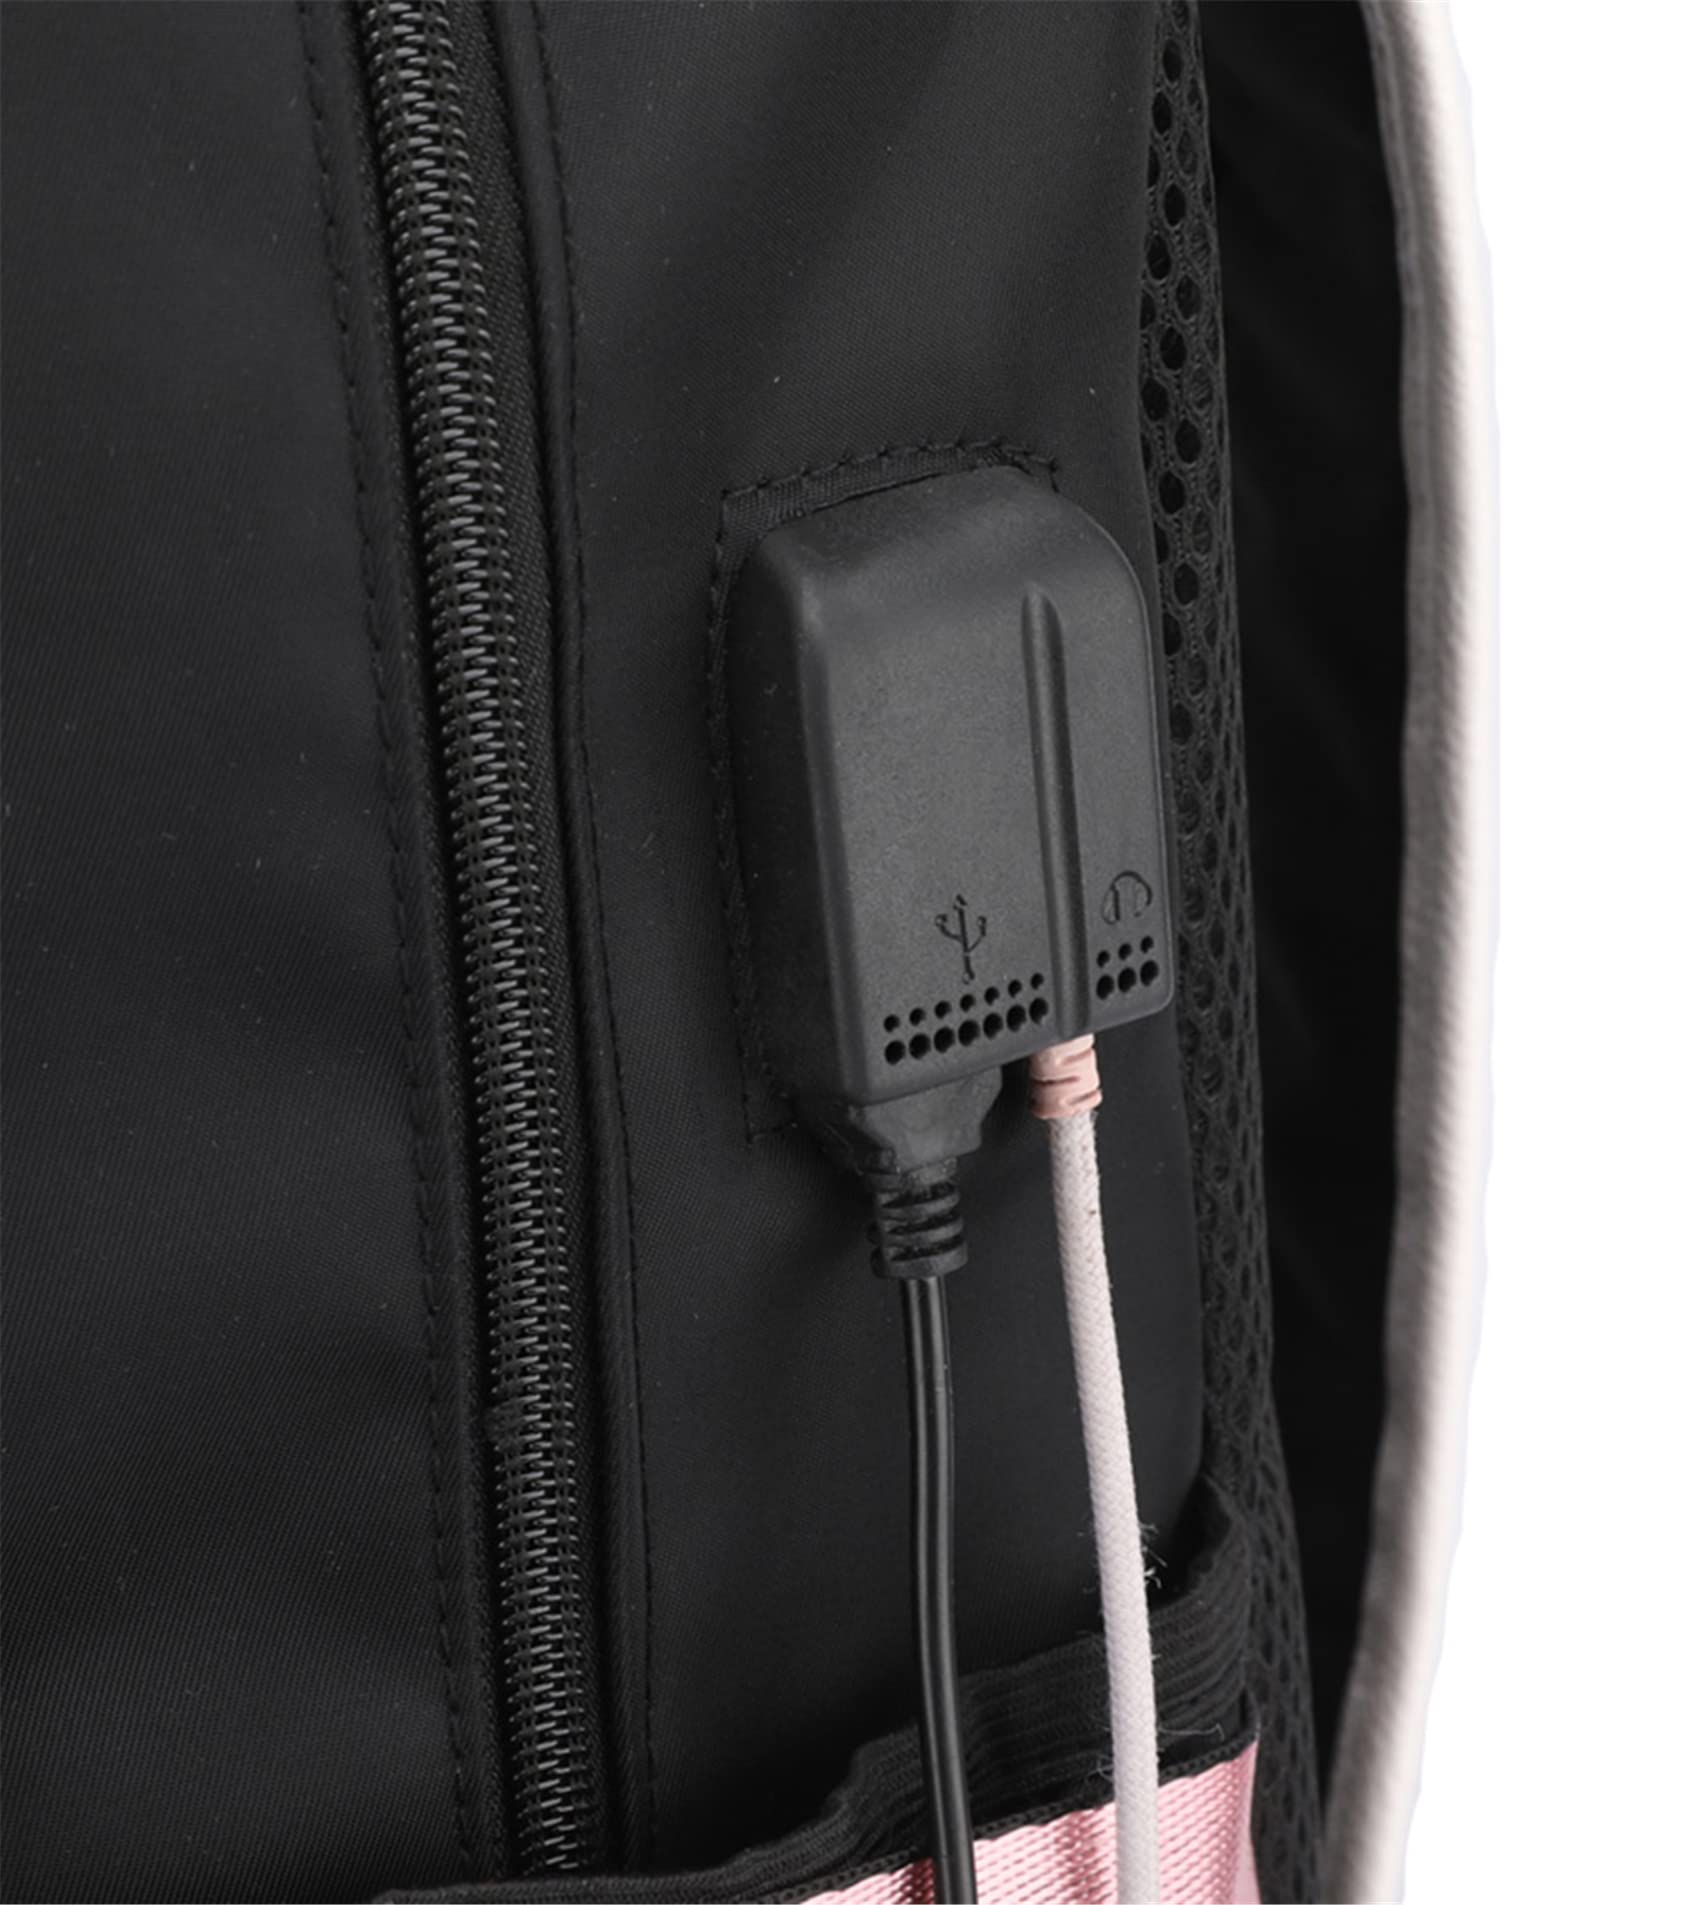 UMocan Bookbag with USB Charger Port Student Casual Laptop Bag Anime Graphic Travel Daypack